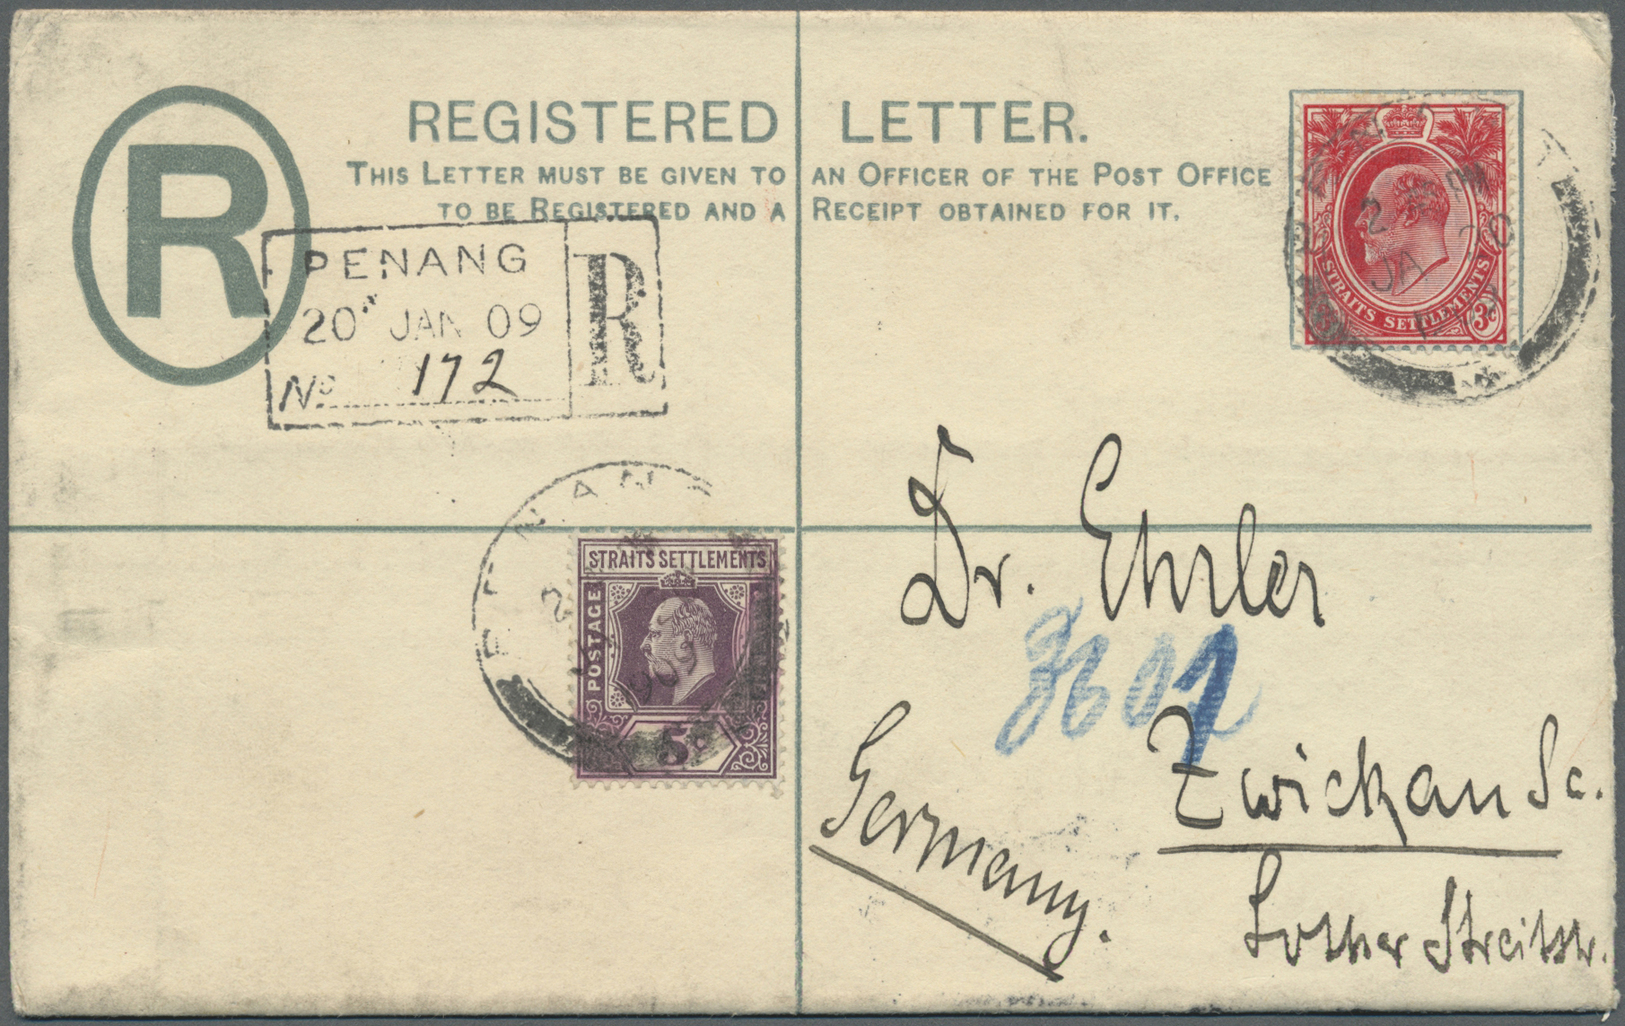 GA Malaiische Staaten - Straits Settlements: 1909, Registration Envelope KEVII 10 C. Uprated KEVII Total 8 C. (two Diffe - Straits Settlements